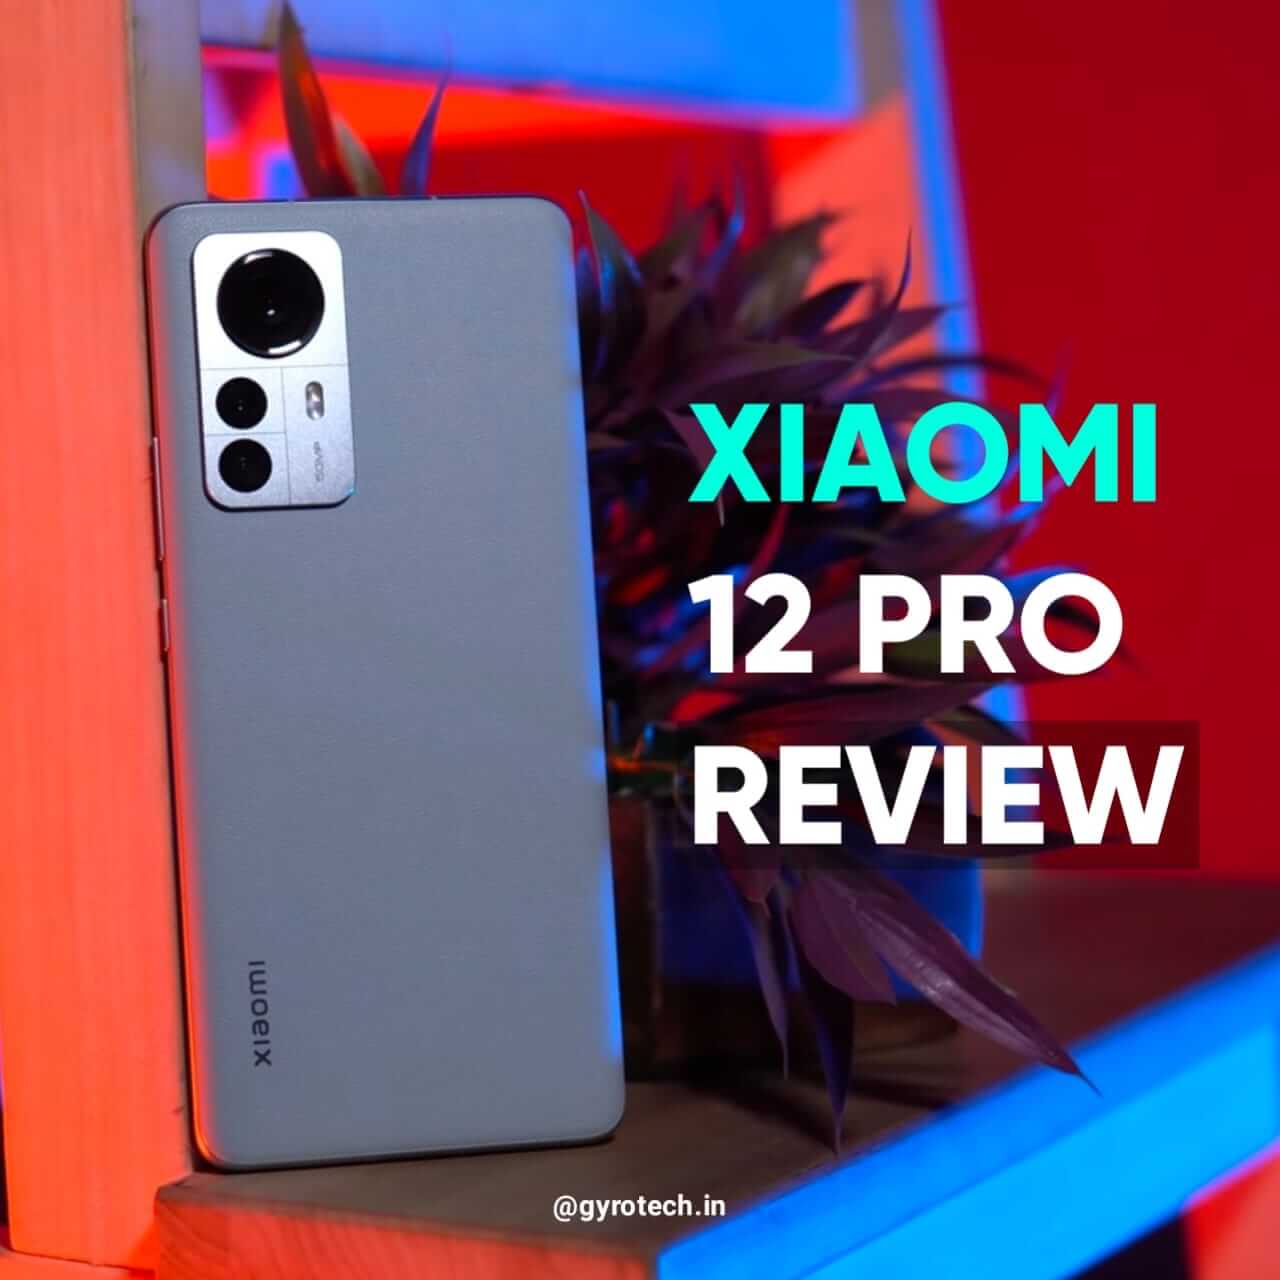 Xiaomi 12 Pro Specifications & Review